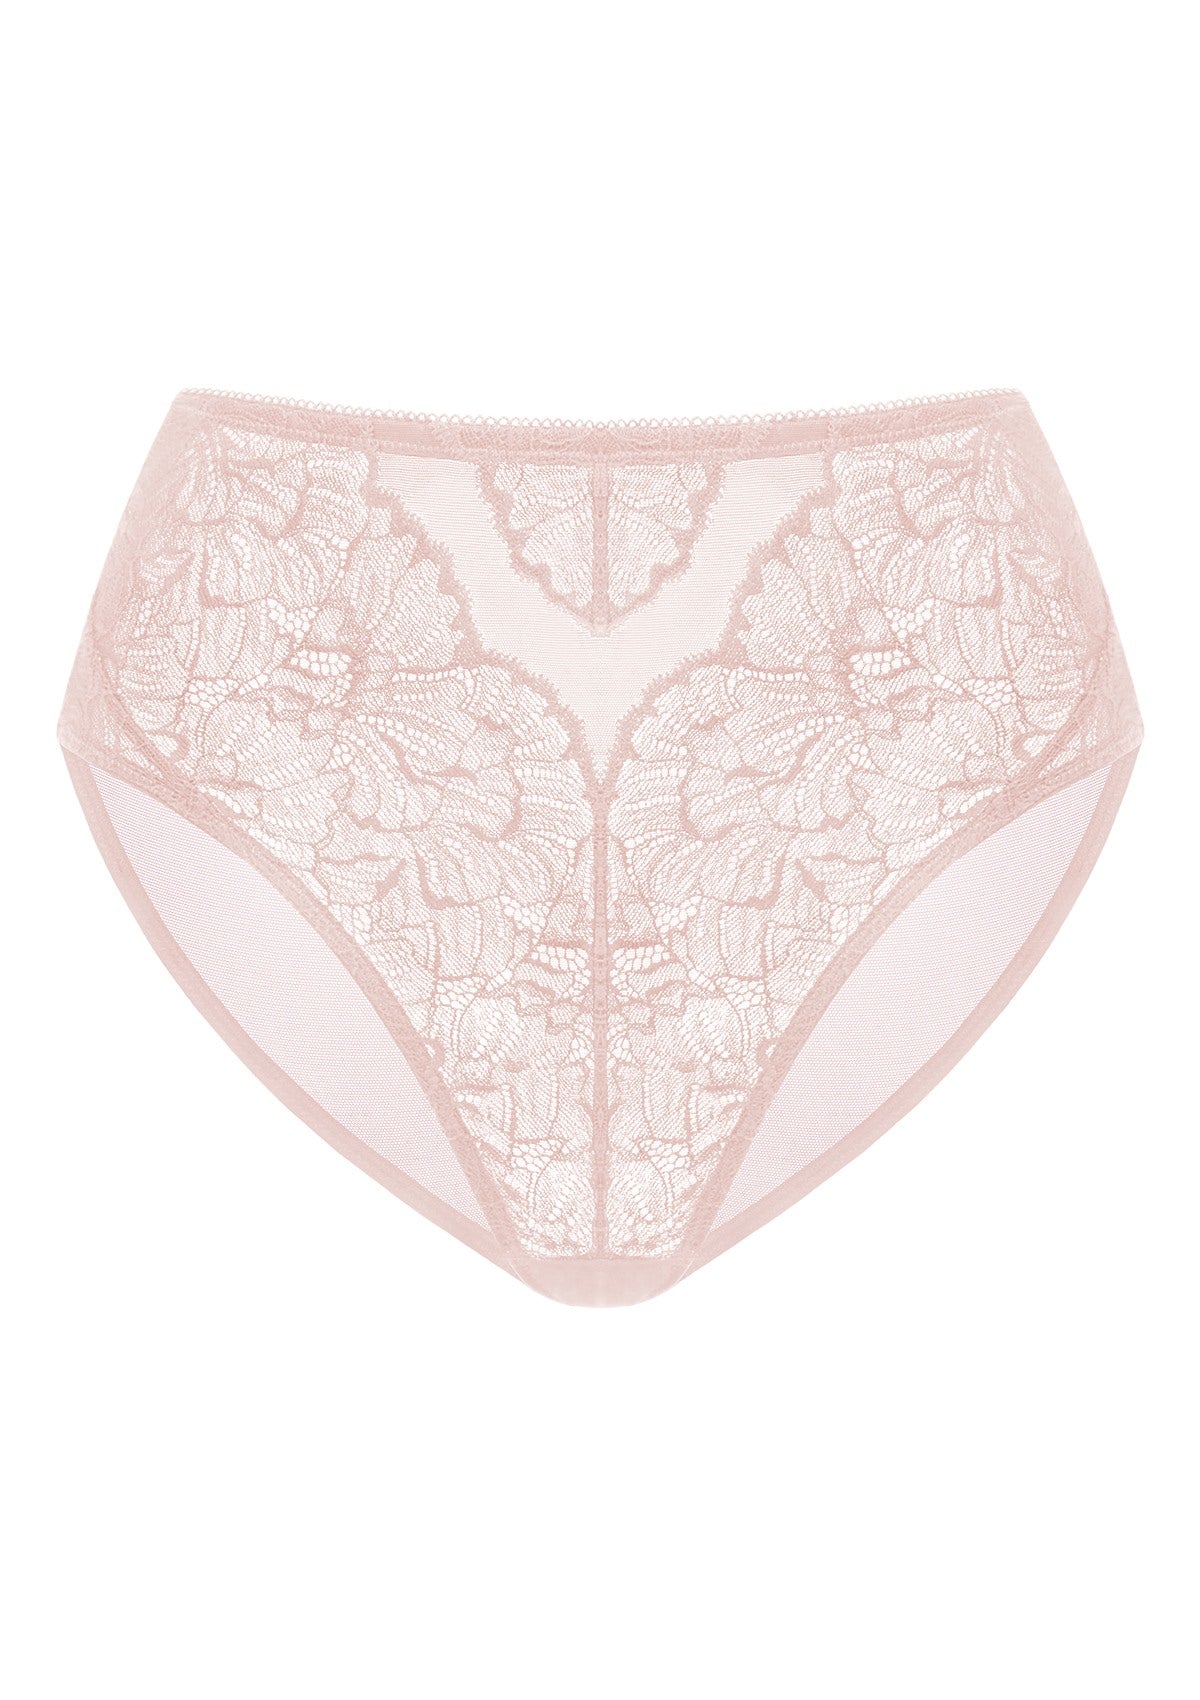 HSIA Blossom High-Rise Floral Lacy Panty-Comfort In Style - XL / Dusty Peach